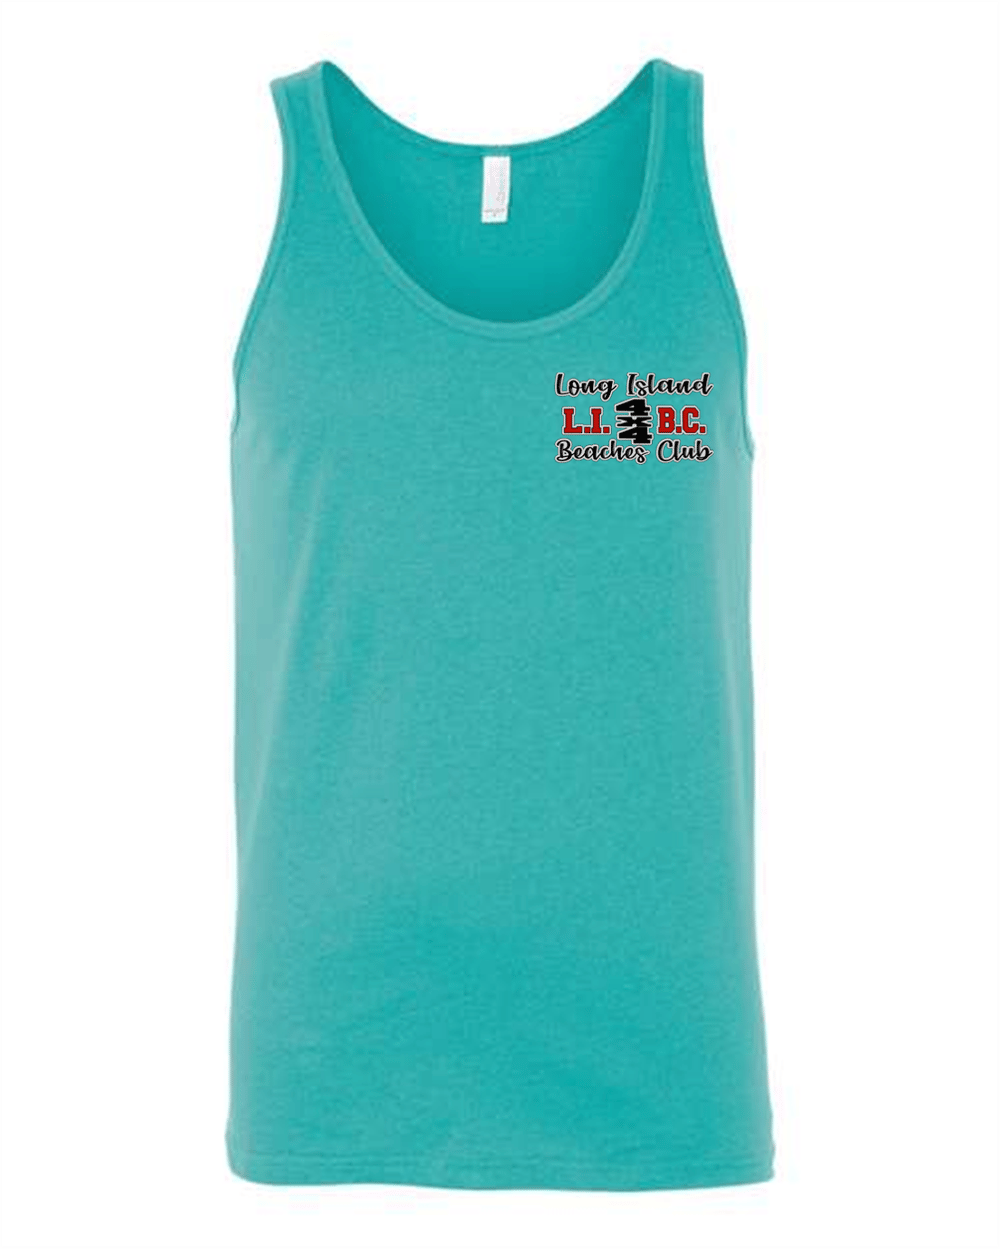 Image of Unisex Club Tank Top- Teal  PICK UP